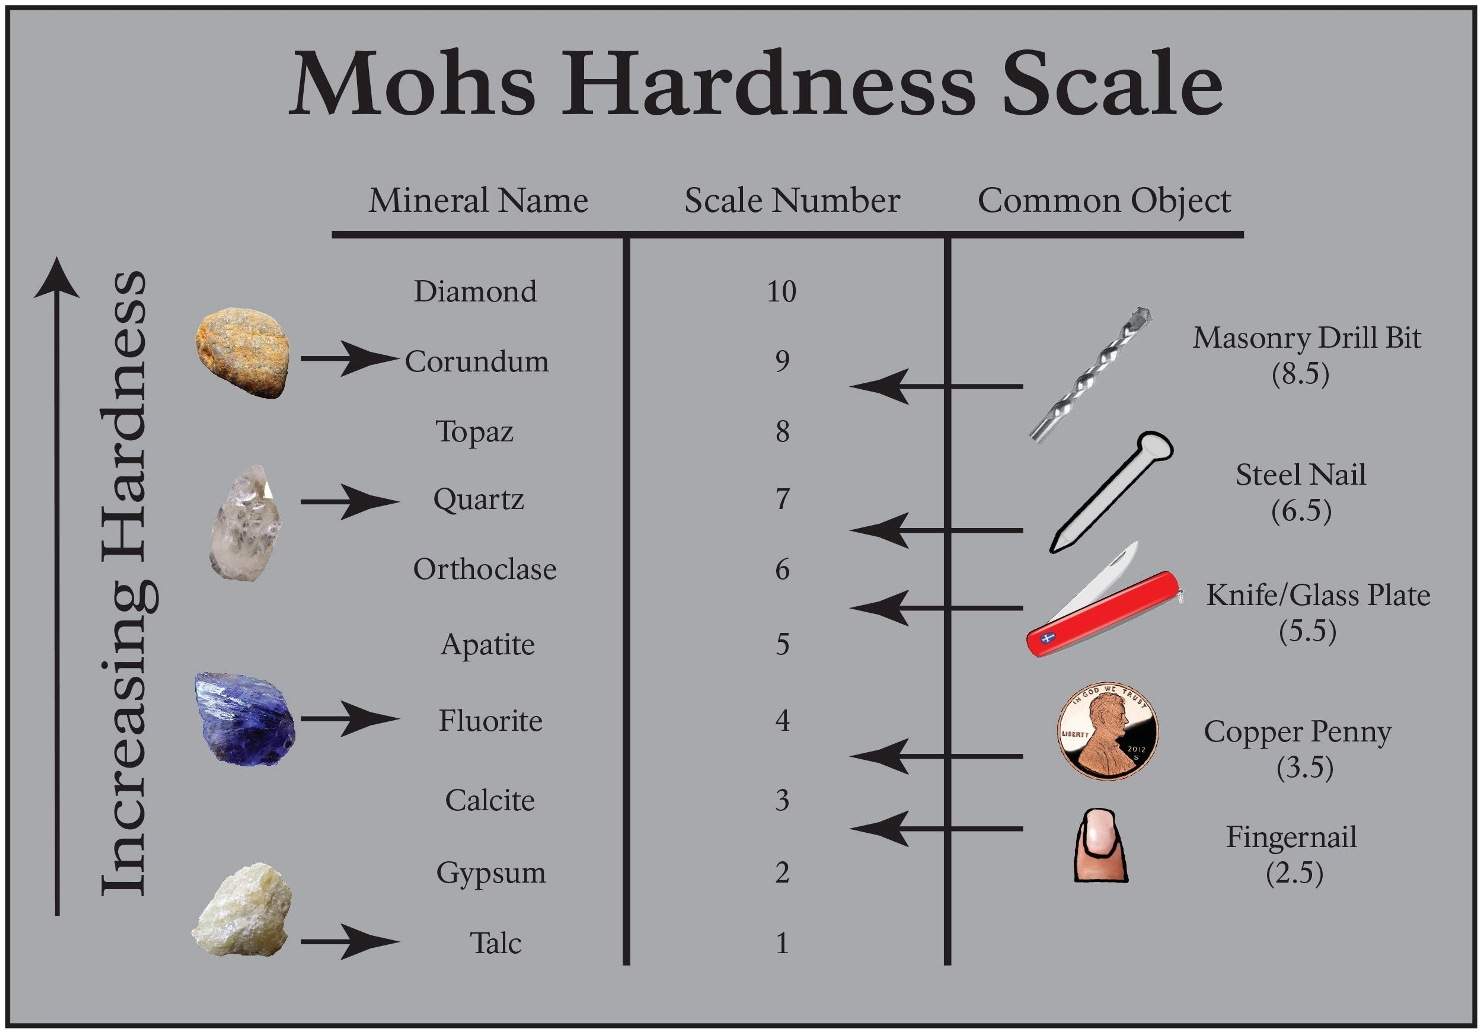 The Mohs Scale of Mineral Hardness